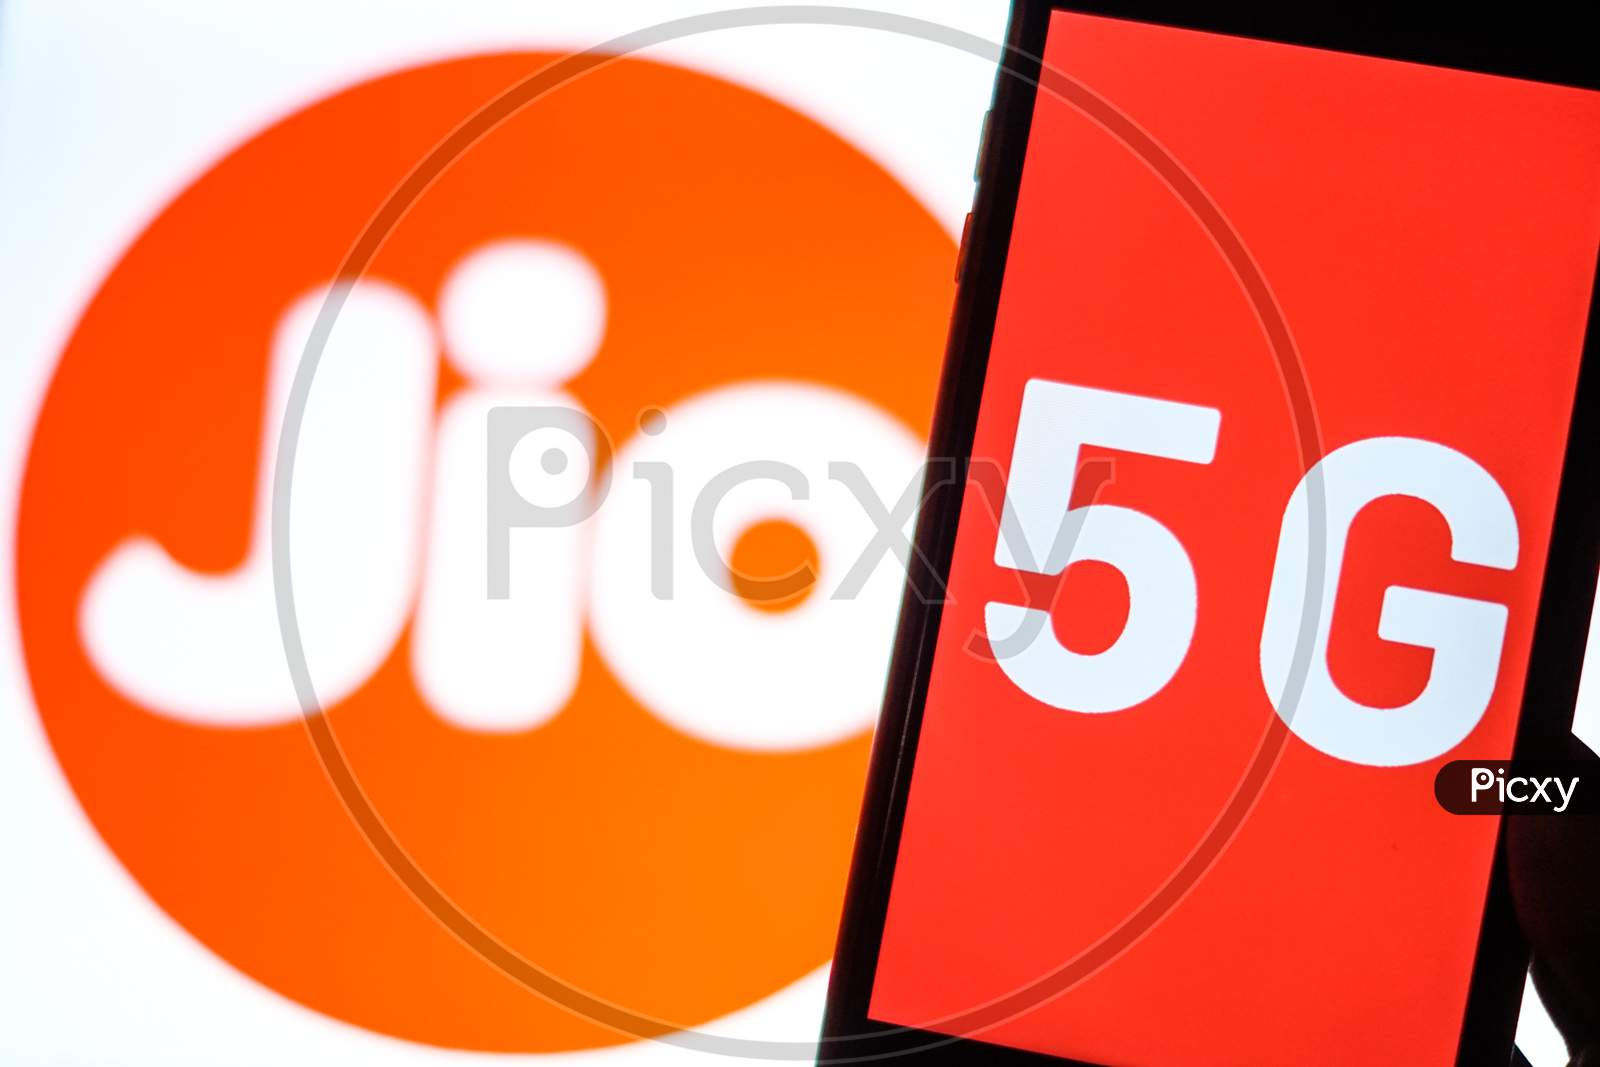 Close Up shot of a Mobilephone or Smartphone with 5G on Screen and Jio Logo in the Background - A Concept of Jio 5G